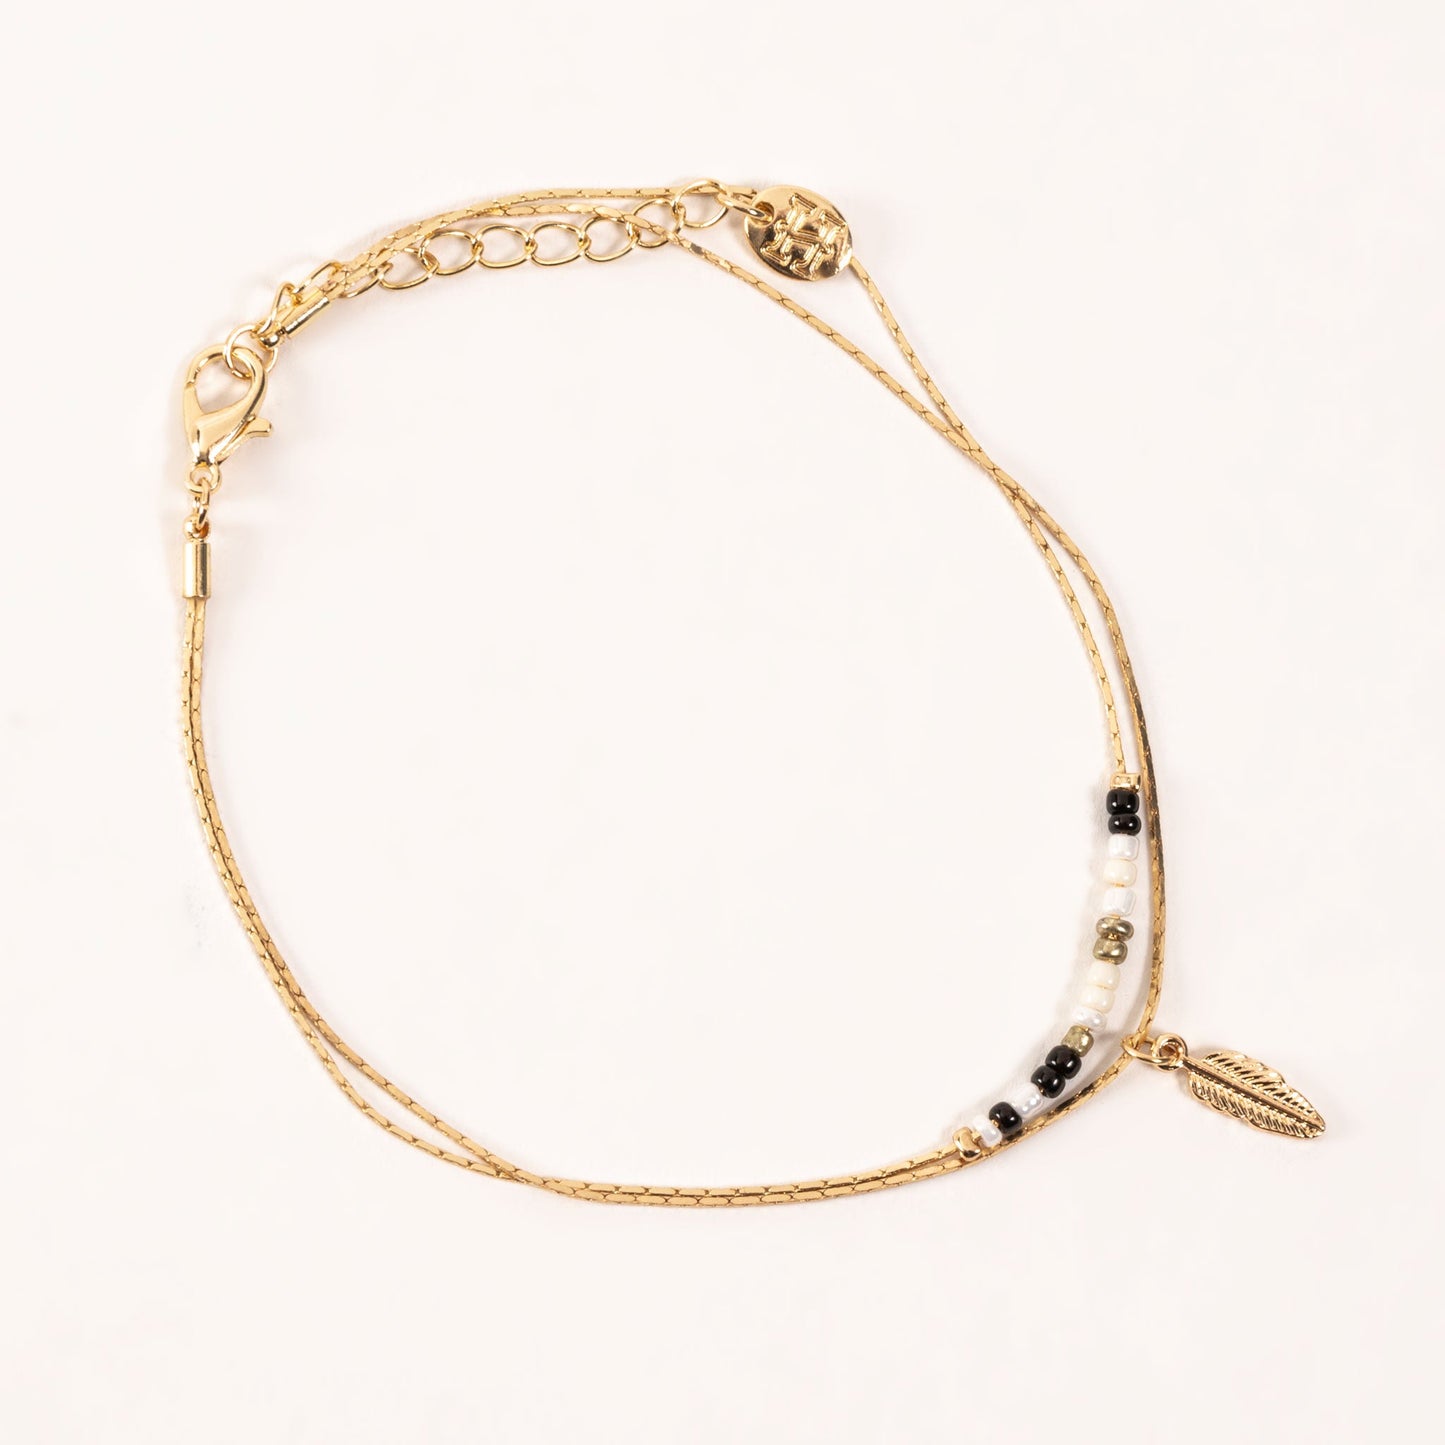 Elsie & Zoey  Alexis Beaded Charm Feather Anklet